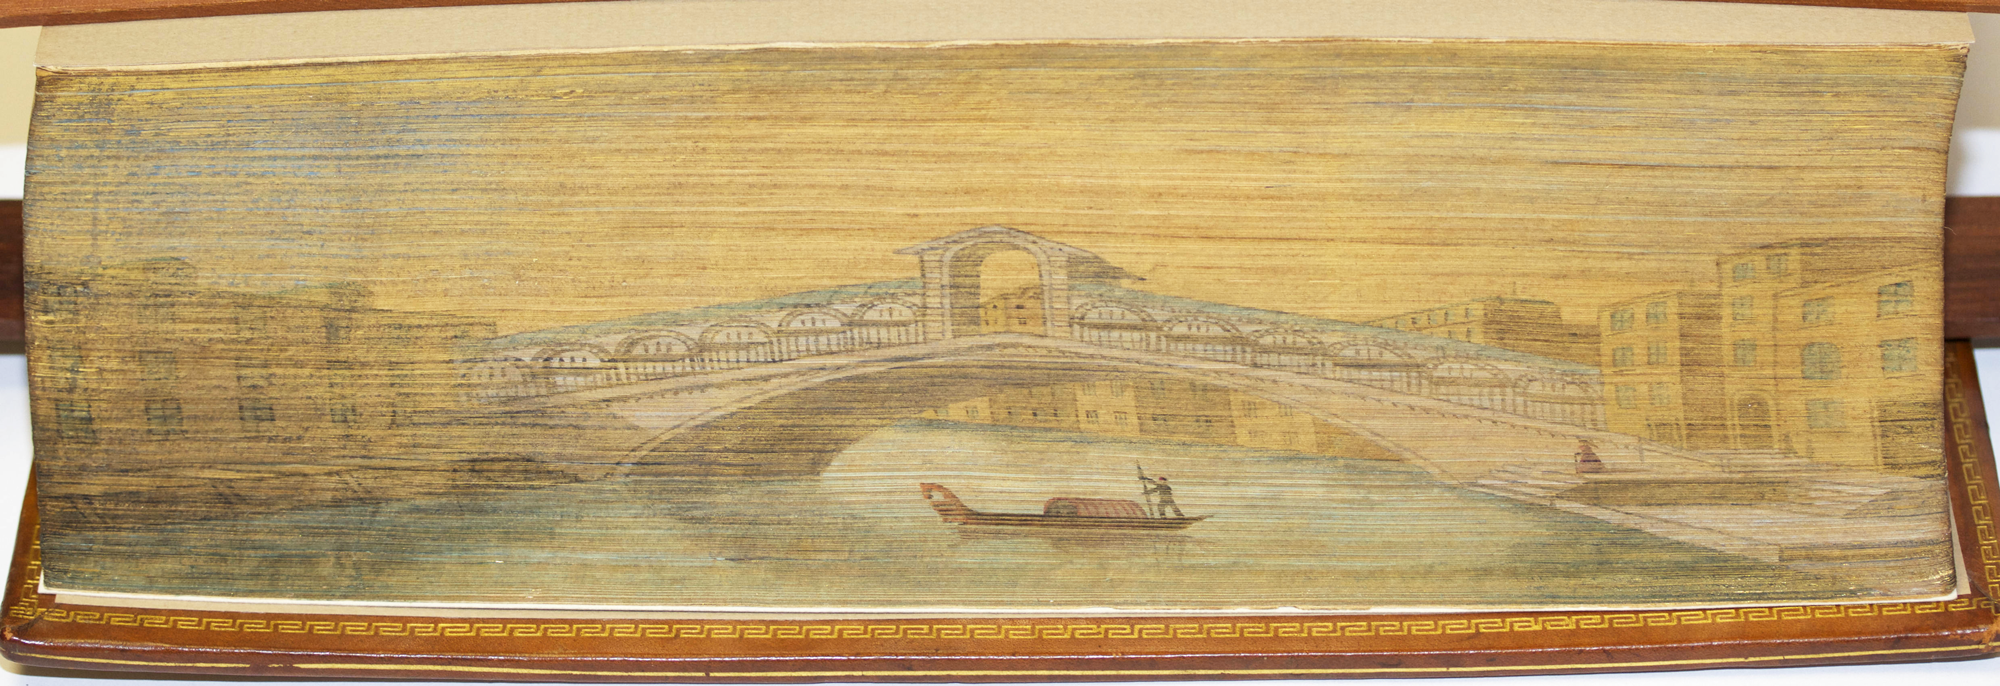 Fore-edge painting on book of bridge, river and gondola.